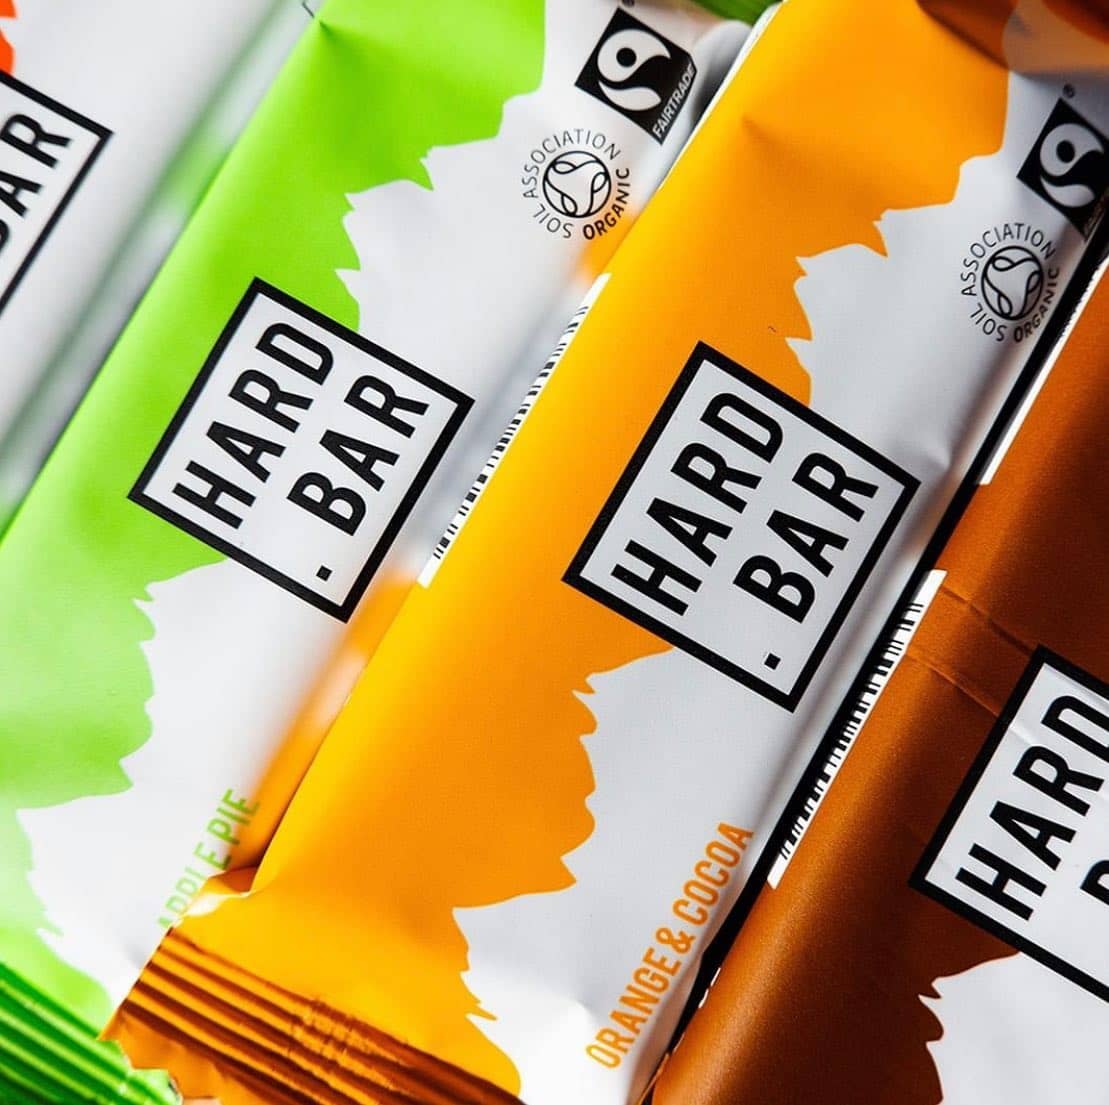 Vegan, Ethical, Plastic-Negative @hard.bar are a great snack for your adventure, and what's more,...